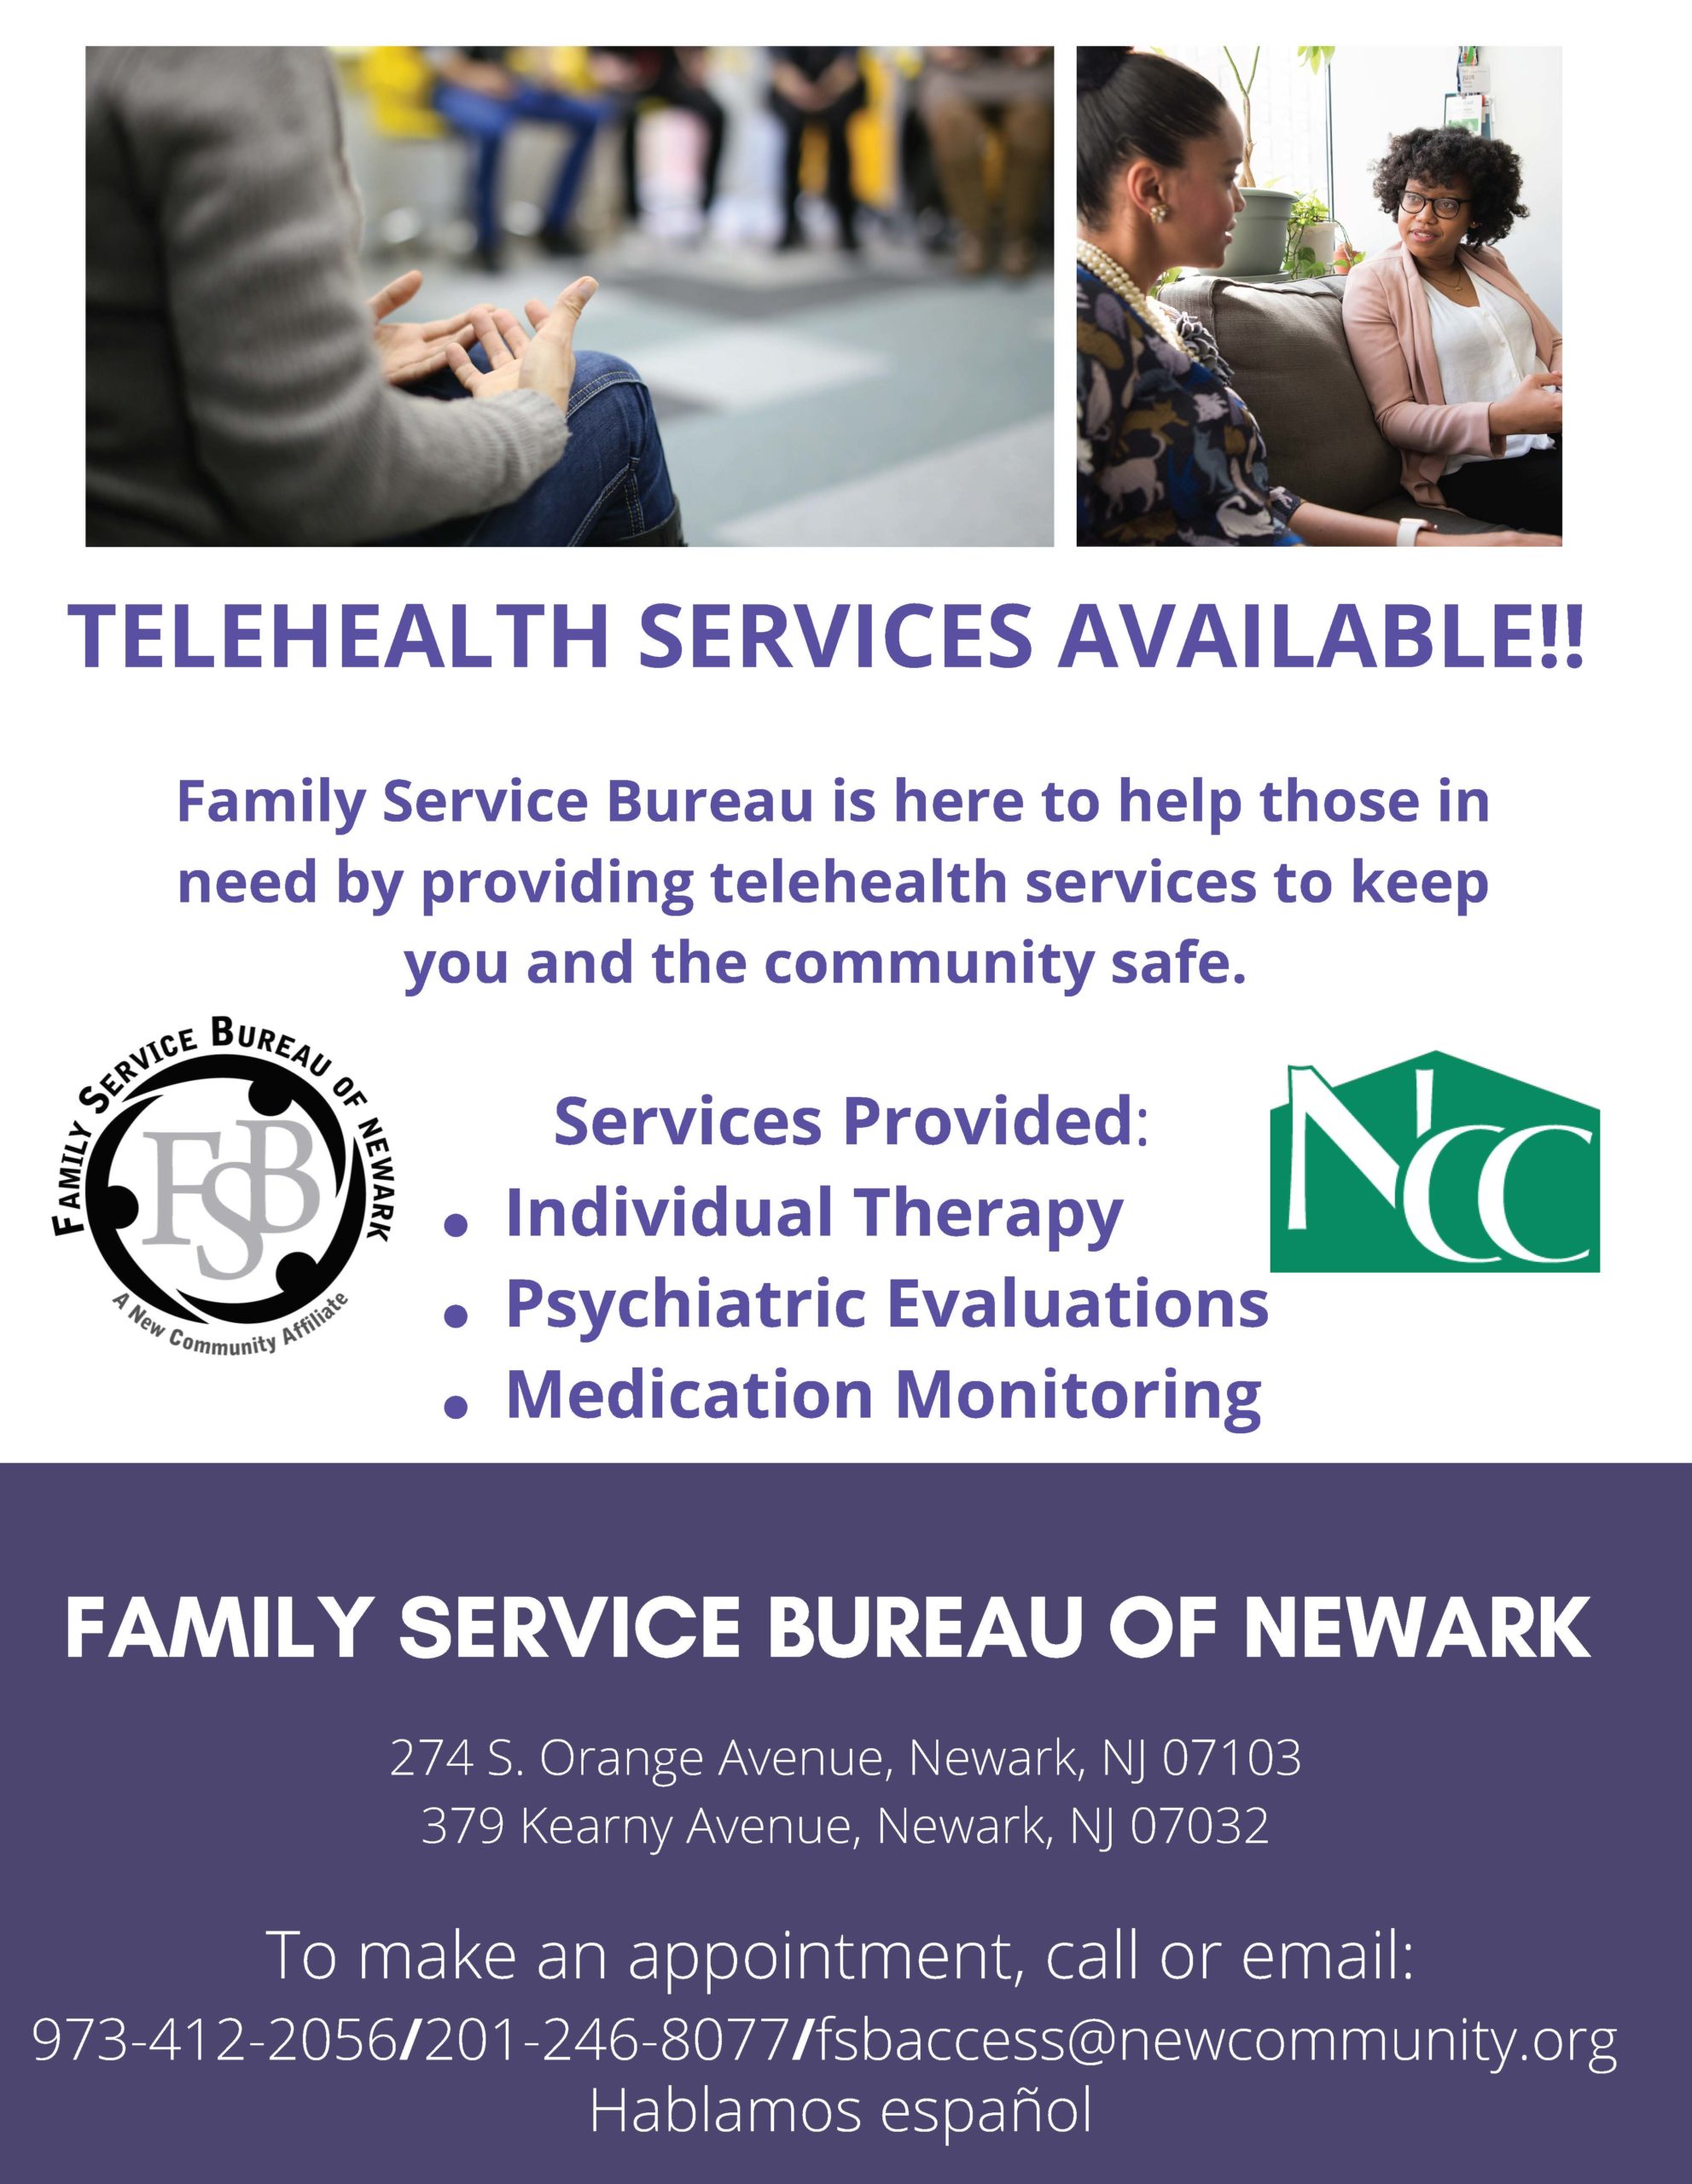 Due to the coronavirus pandemic, telehealth services are being provided. Click here for details.